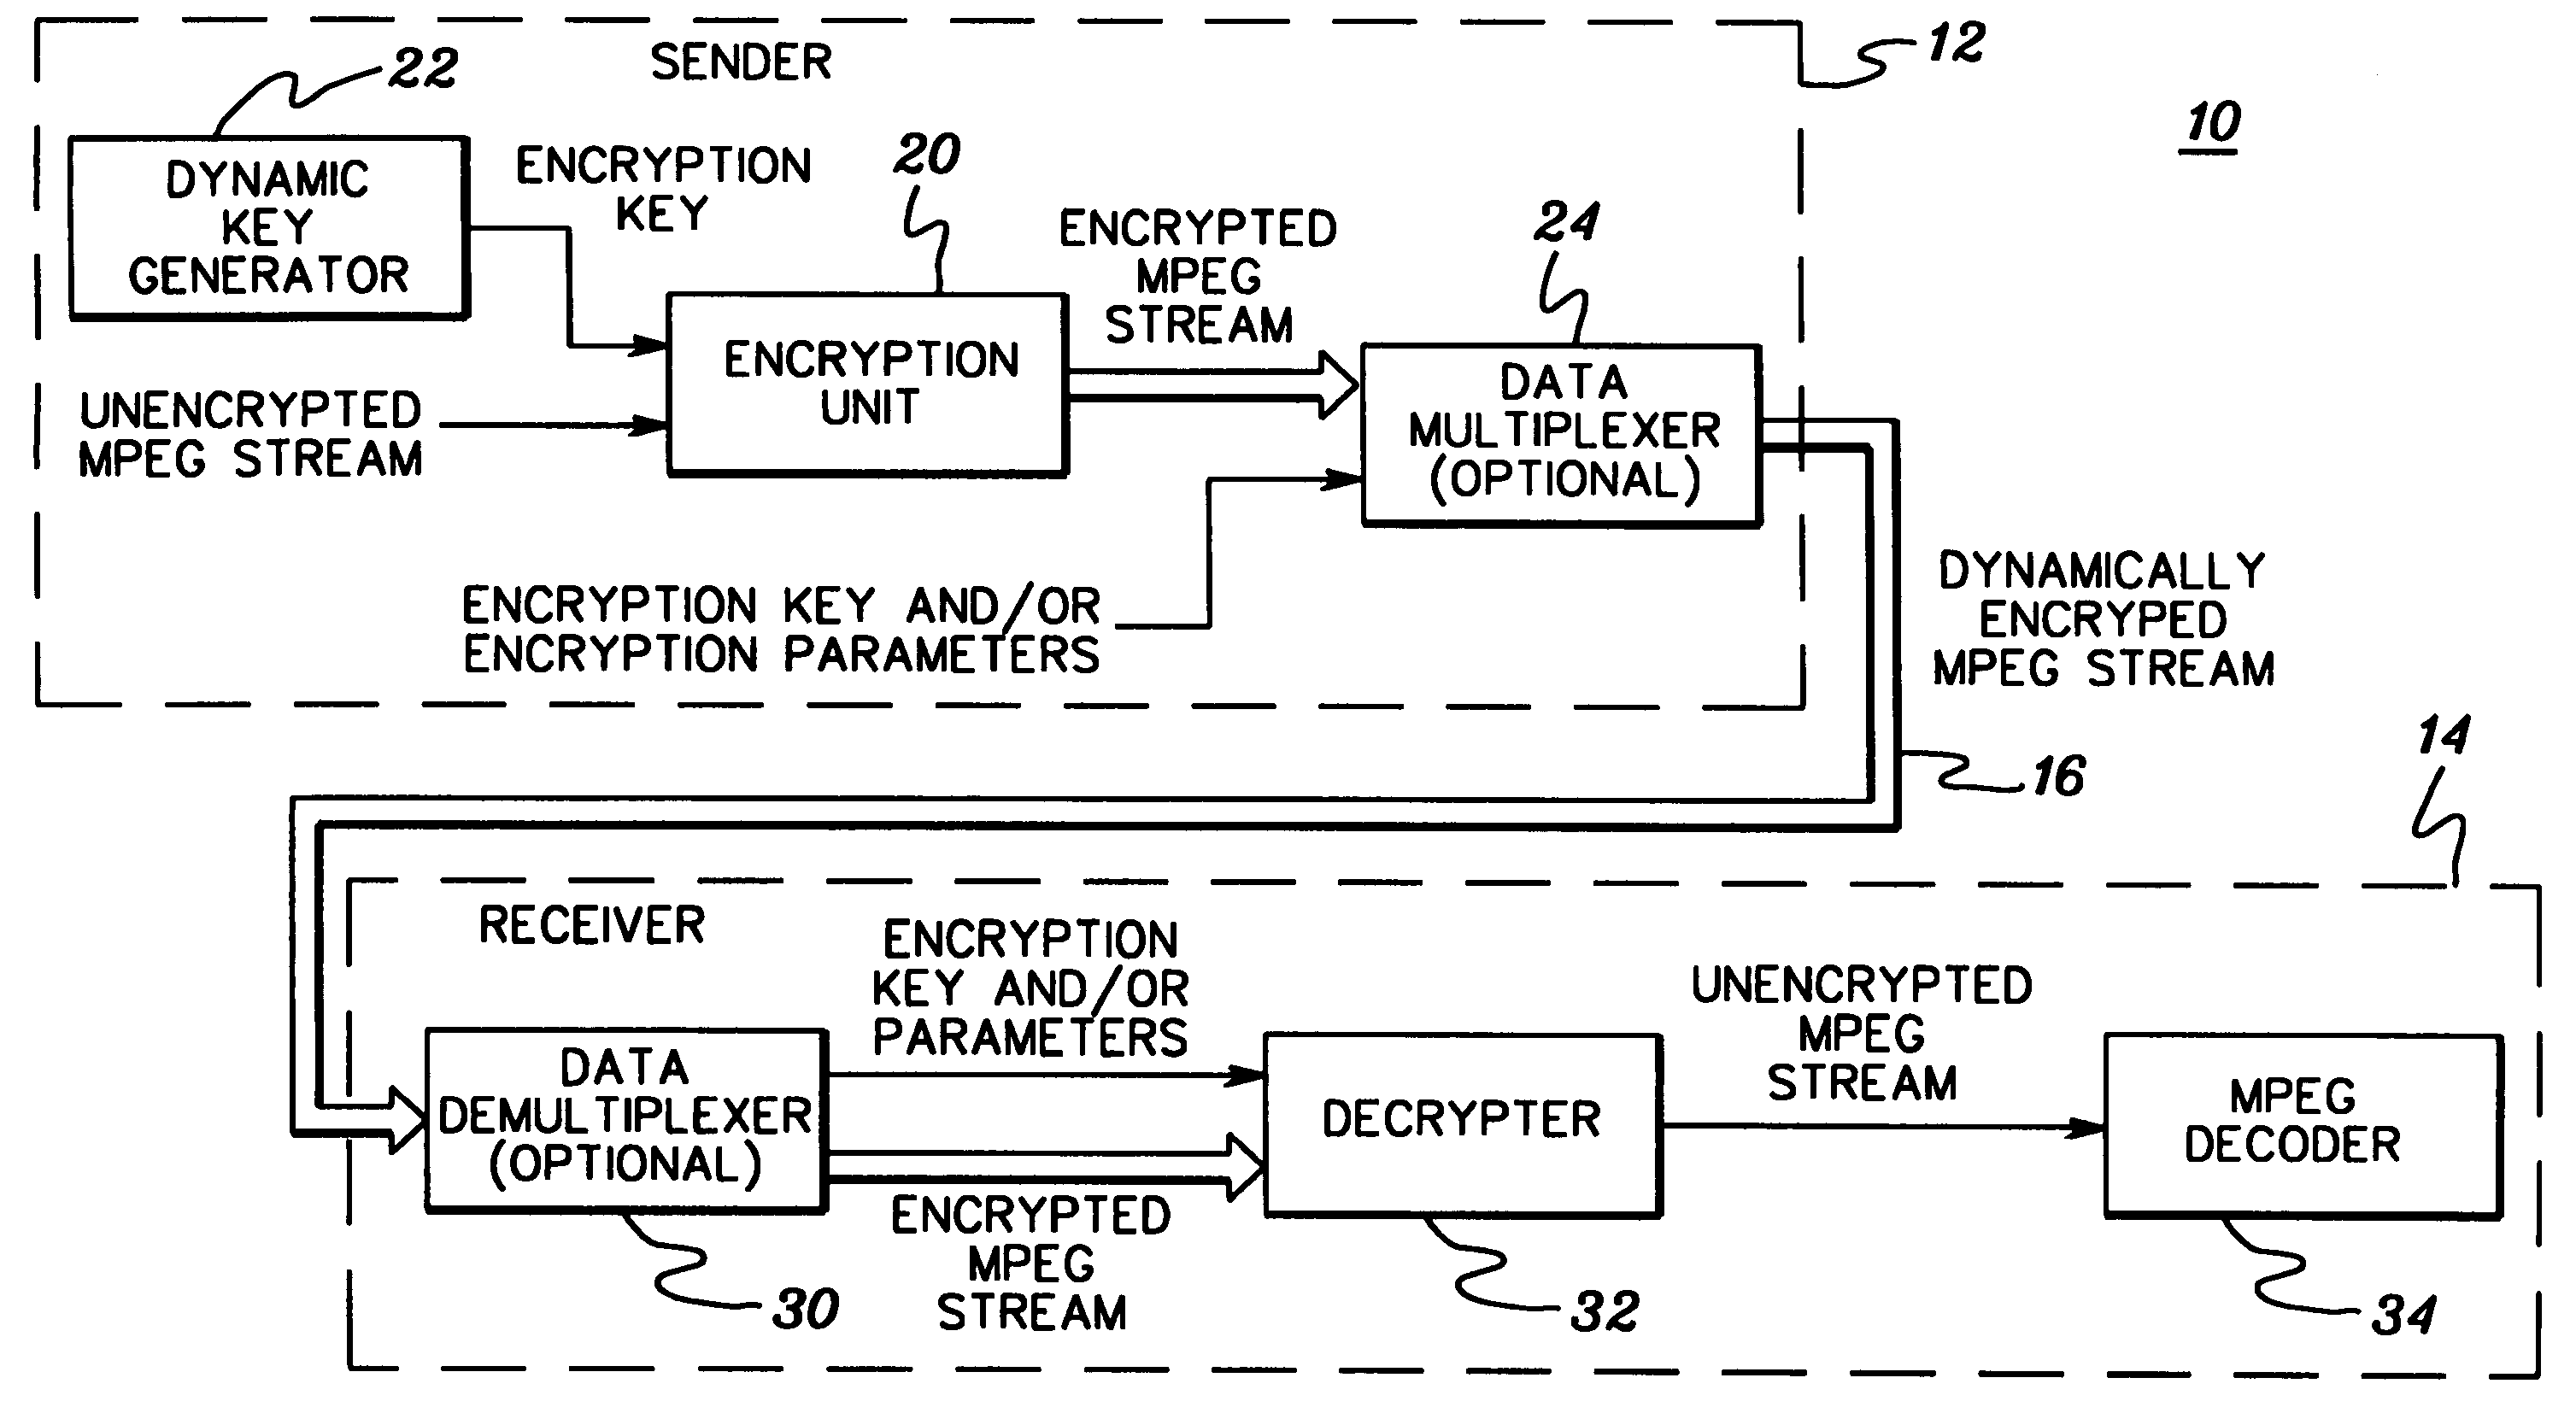 Dynamic encryption and decryption of a stream of data